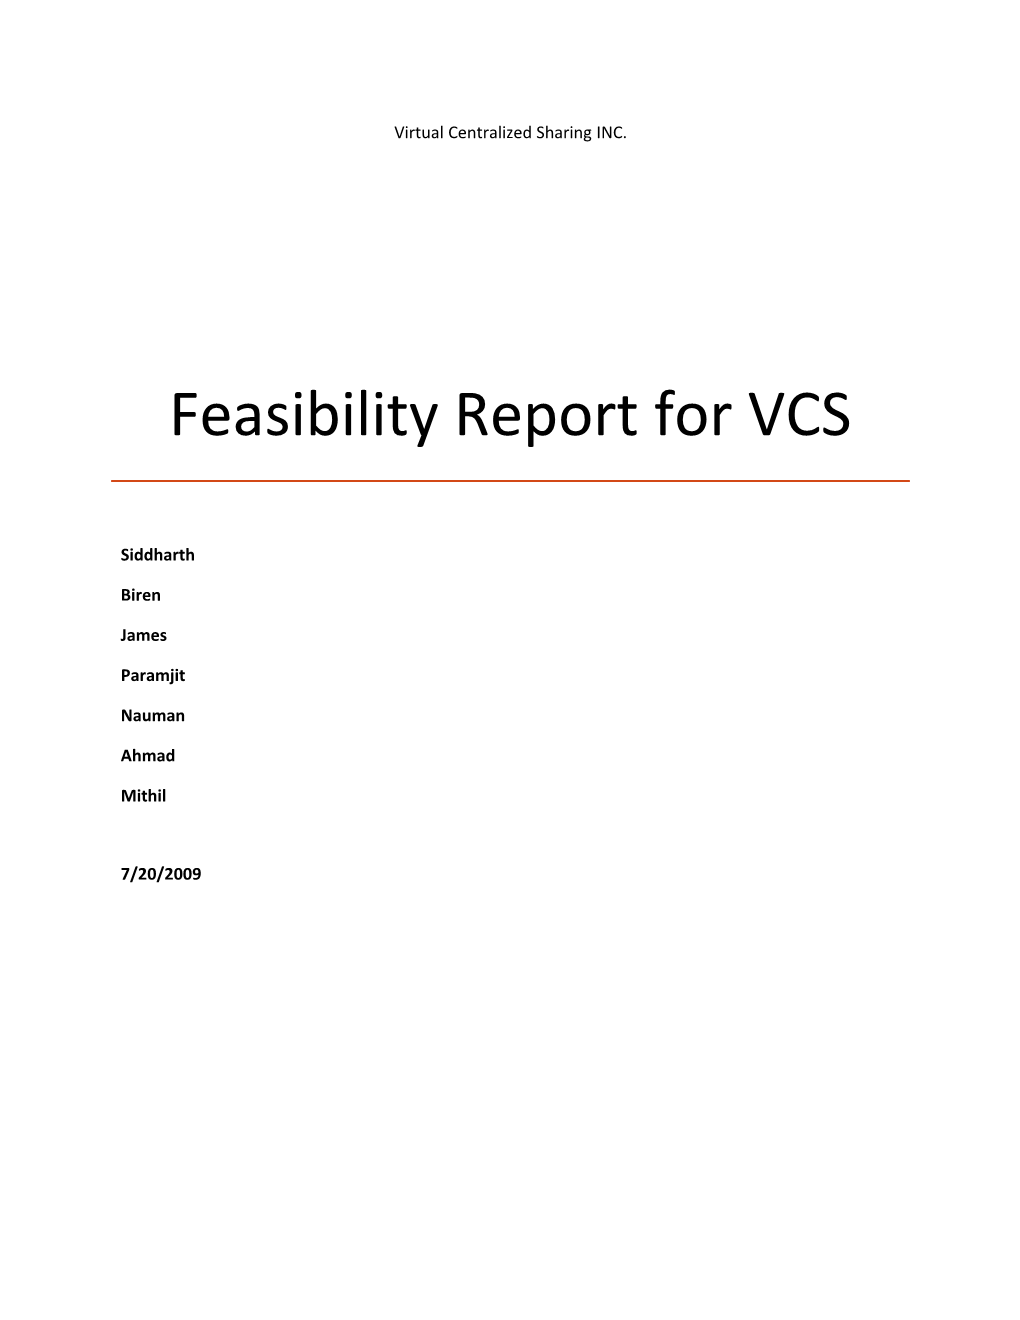 Feasibility Report for VCS